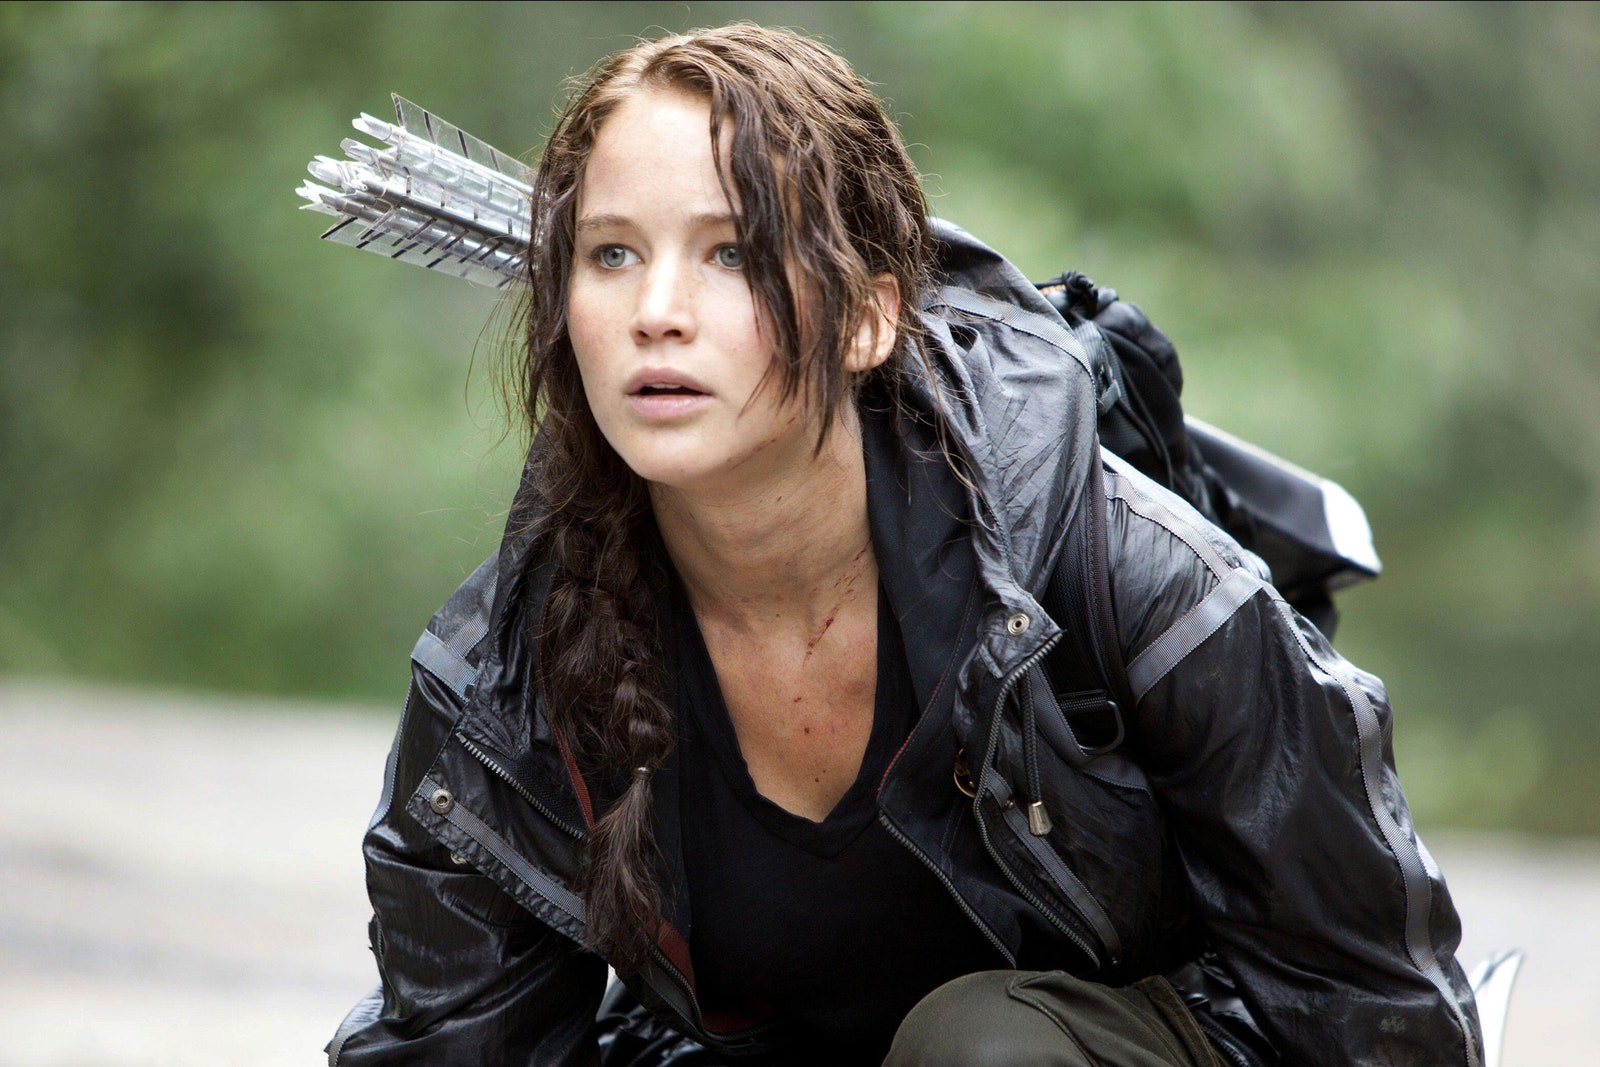 Jennifer Lawrence as Catniss Everdeen in the Hunger Games